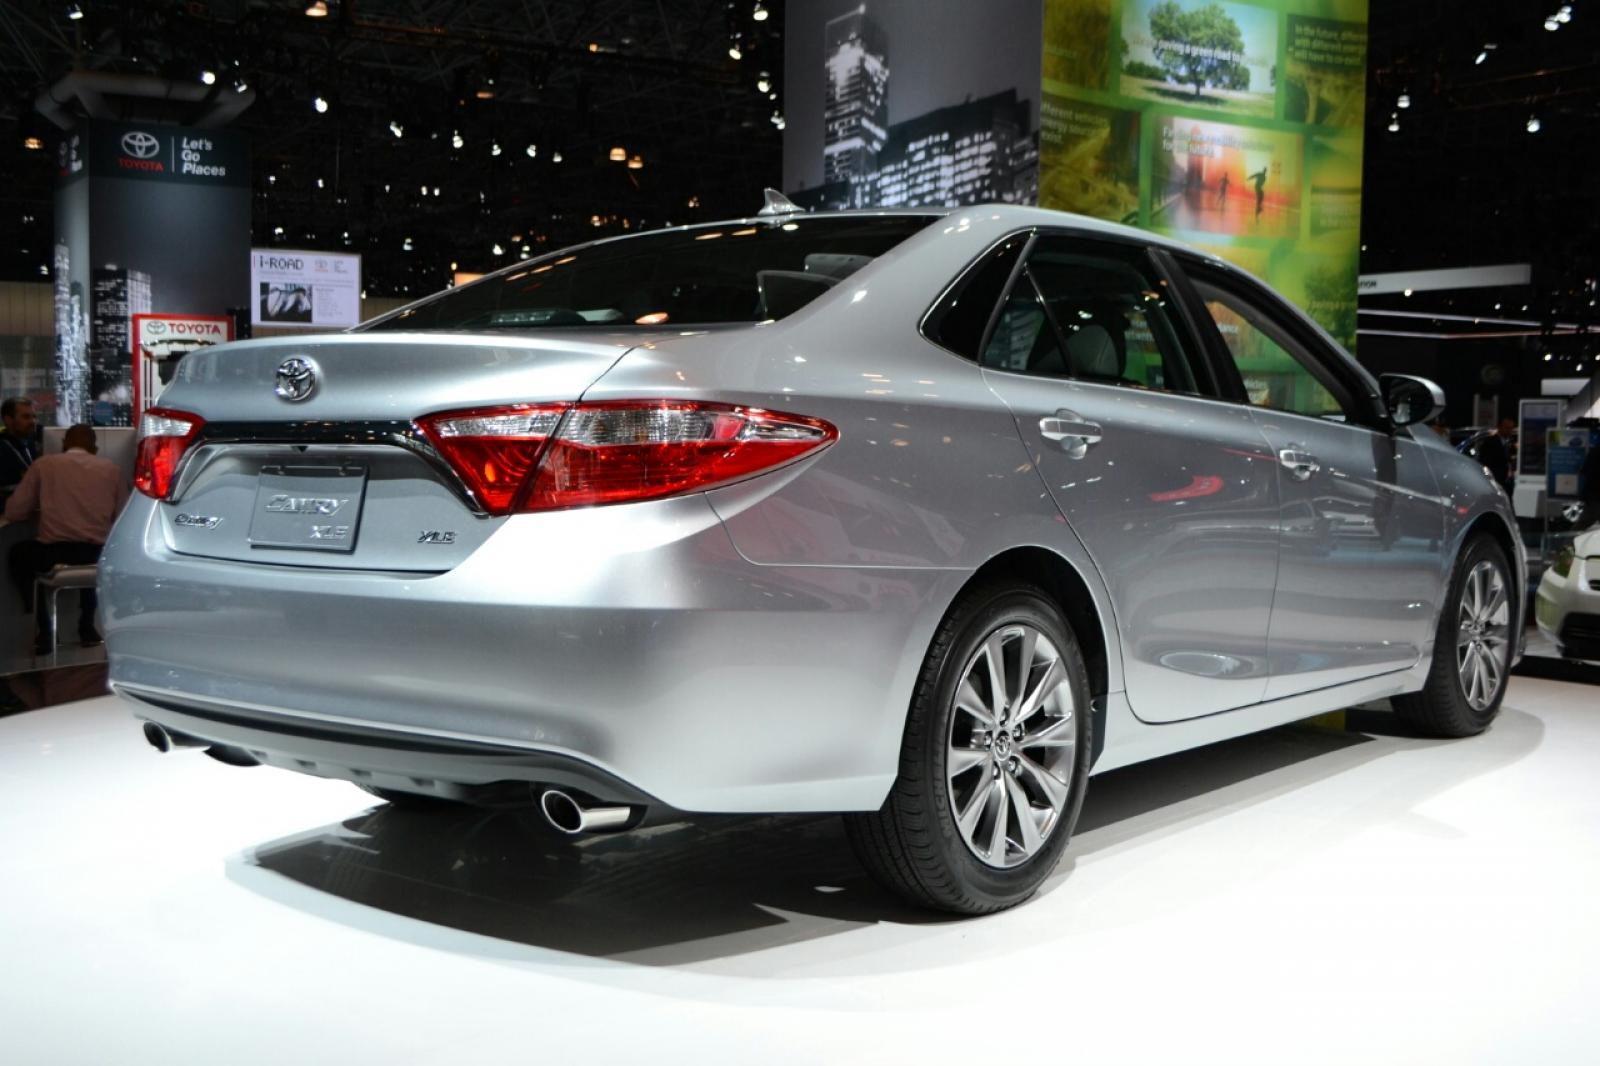 2015 Toyota Camry Wallpapers